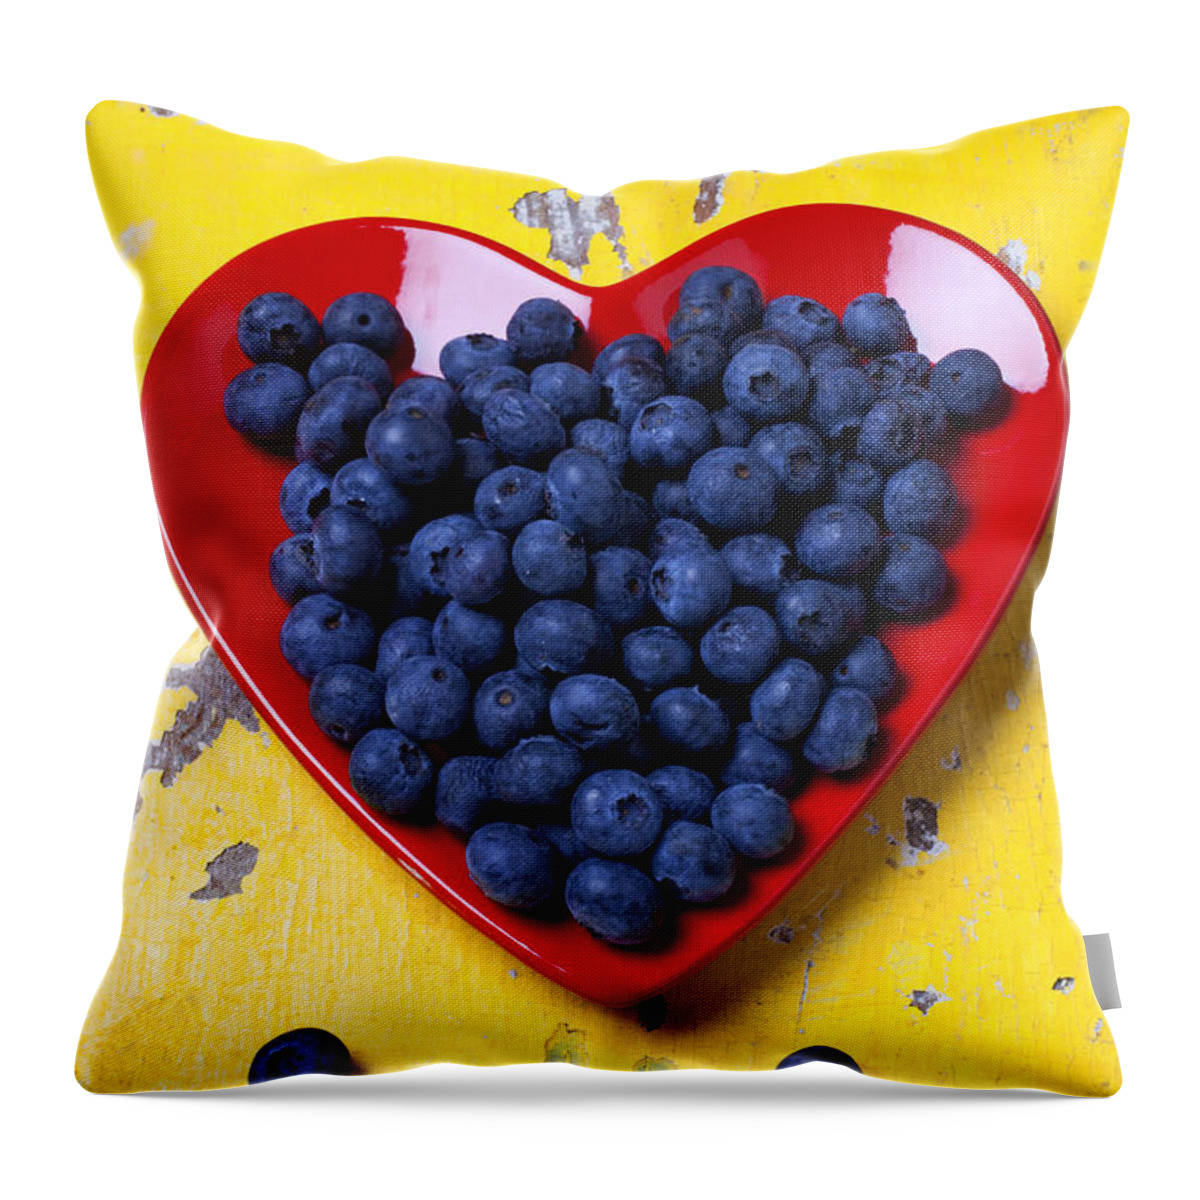 Red Heart Shaped Plate Throw Pillow featuring the photograph Red heart plate with blueberries by Garry Gay